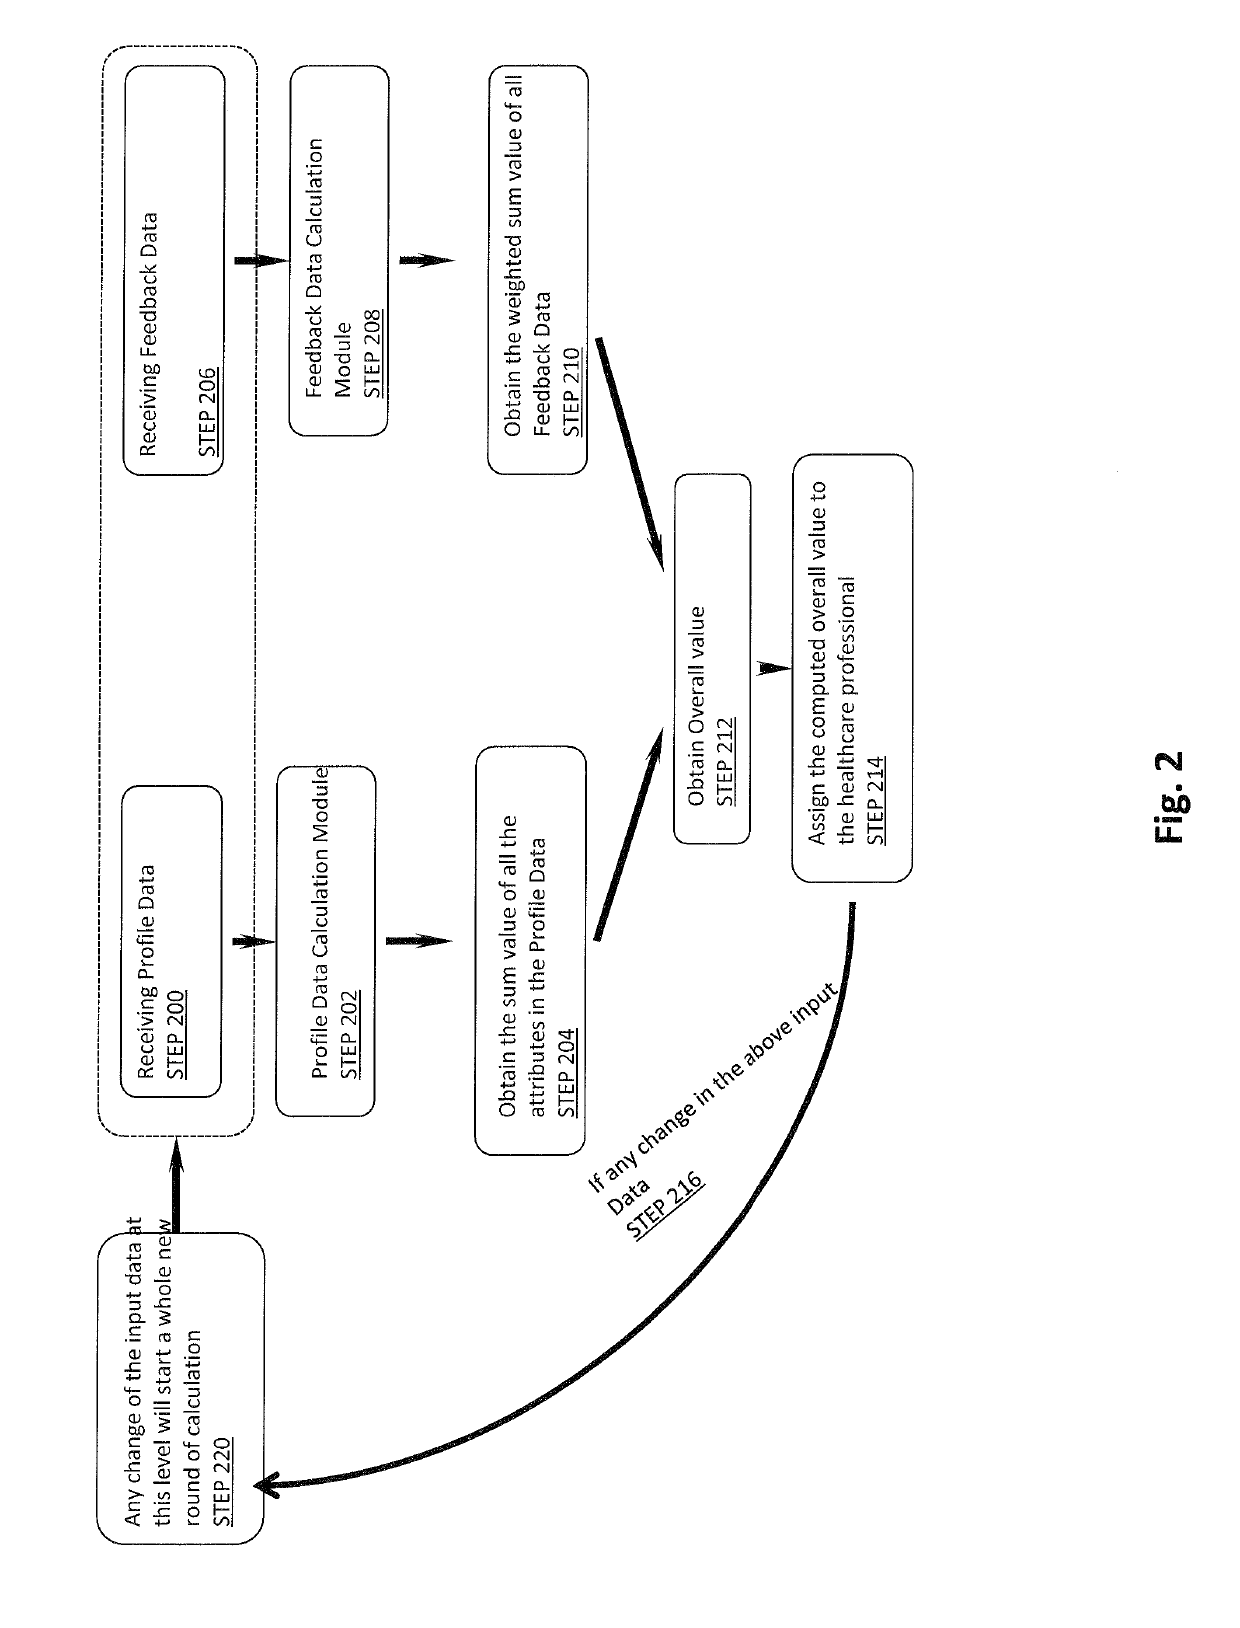 Systems and methods for triaging a health-related inquiry on a computer-implemented virtual consultation application